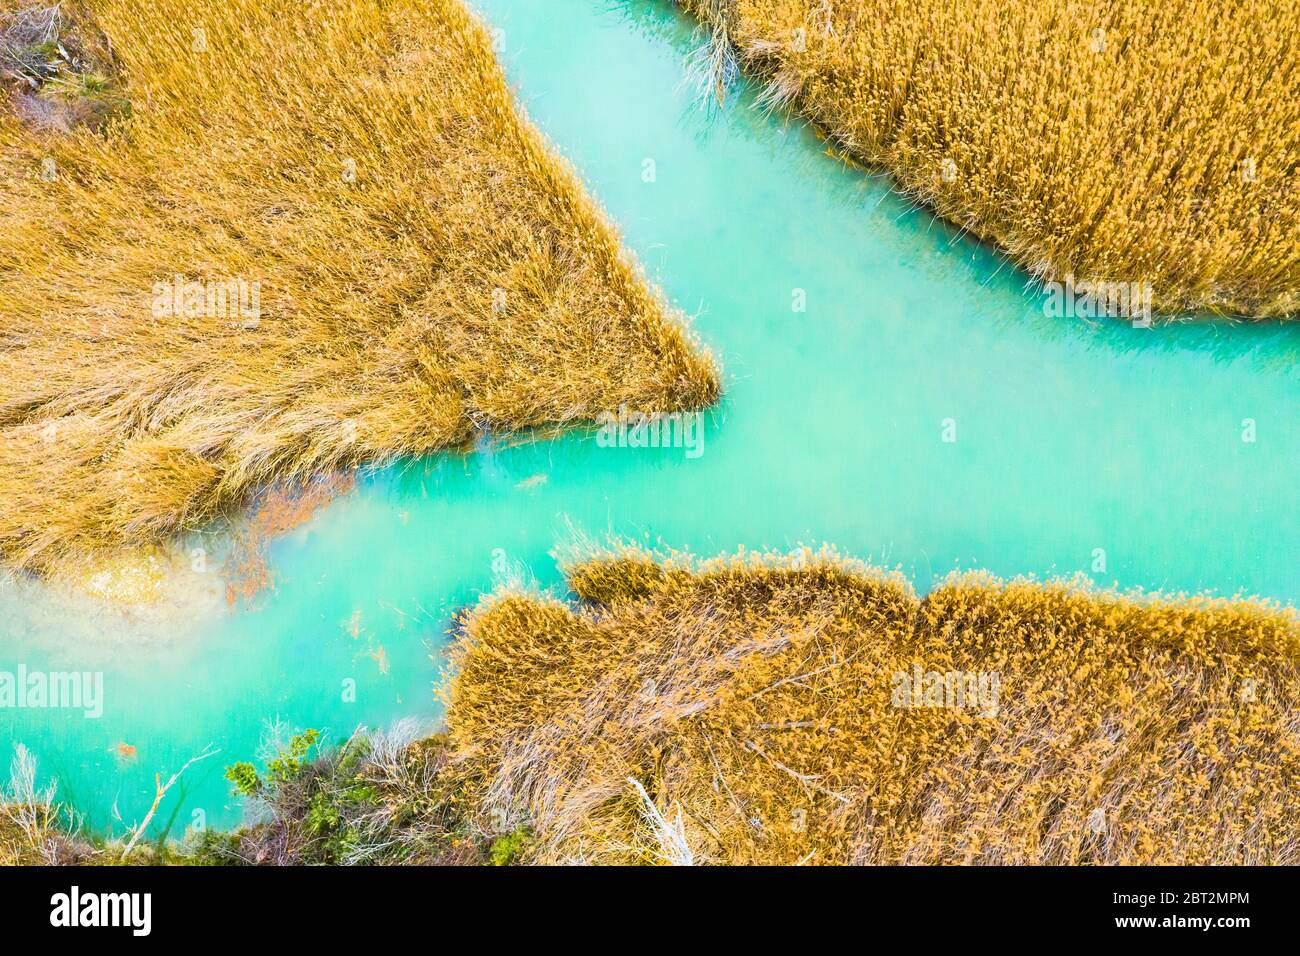 Reedbed and river aerial view. Stock Photo